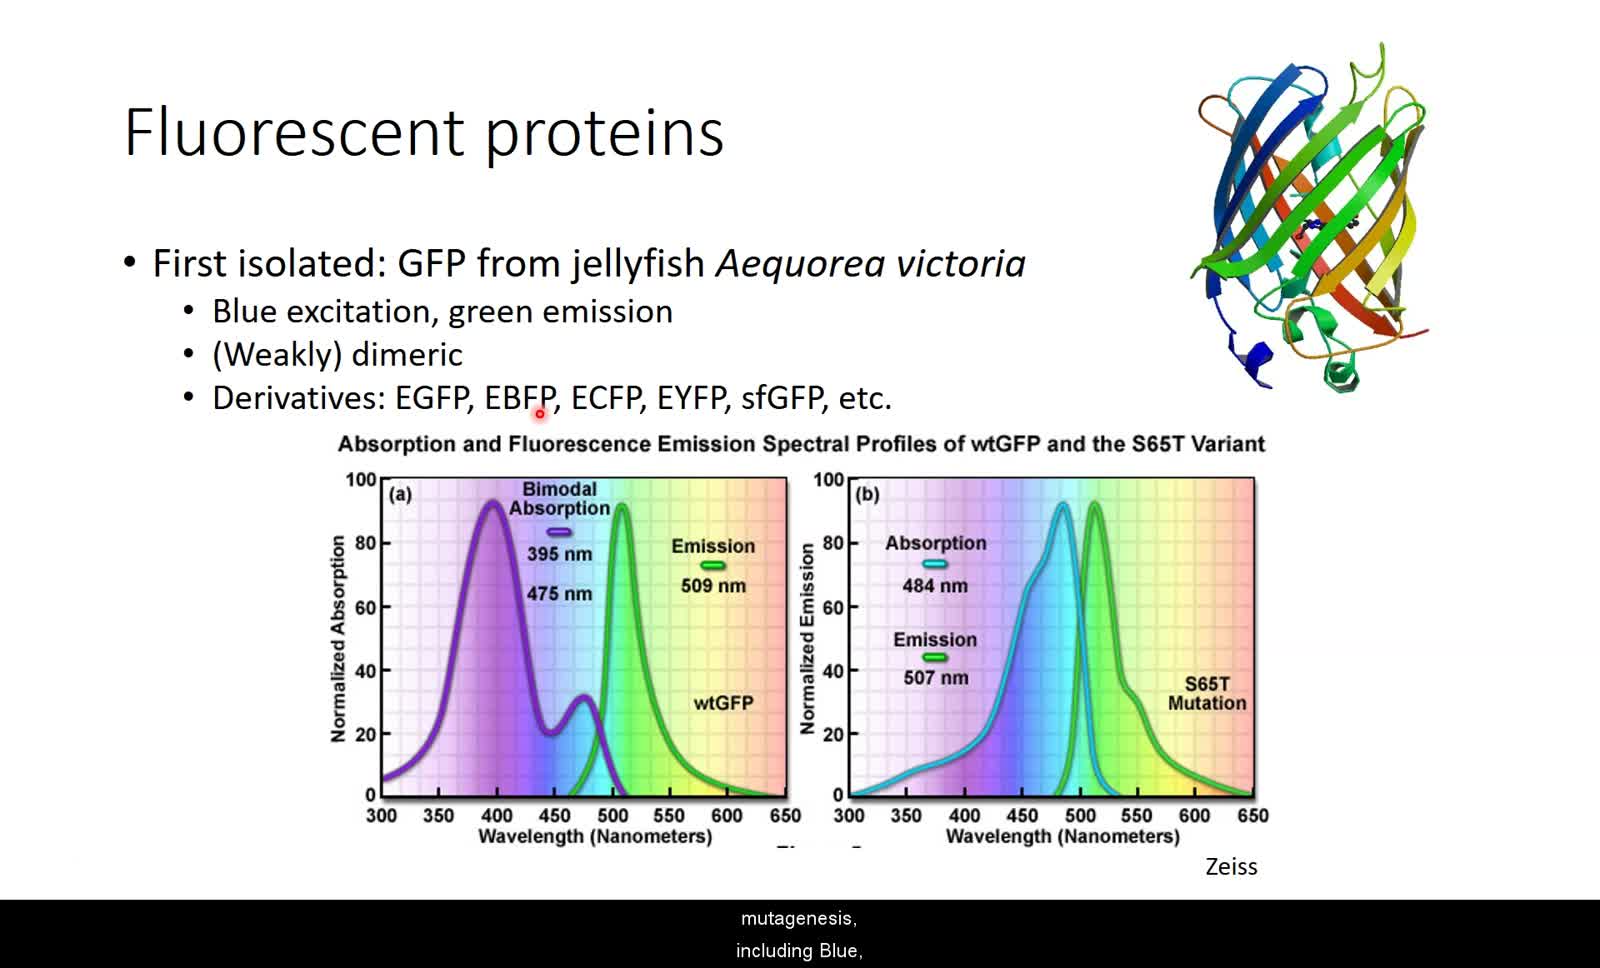 MMG195A Lecture 18 - Dyes, Stains, Antibodies, Fluorescent Proteins